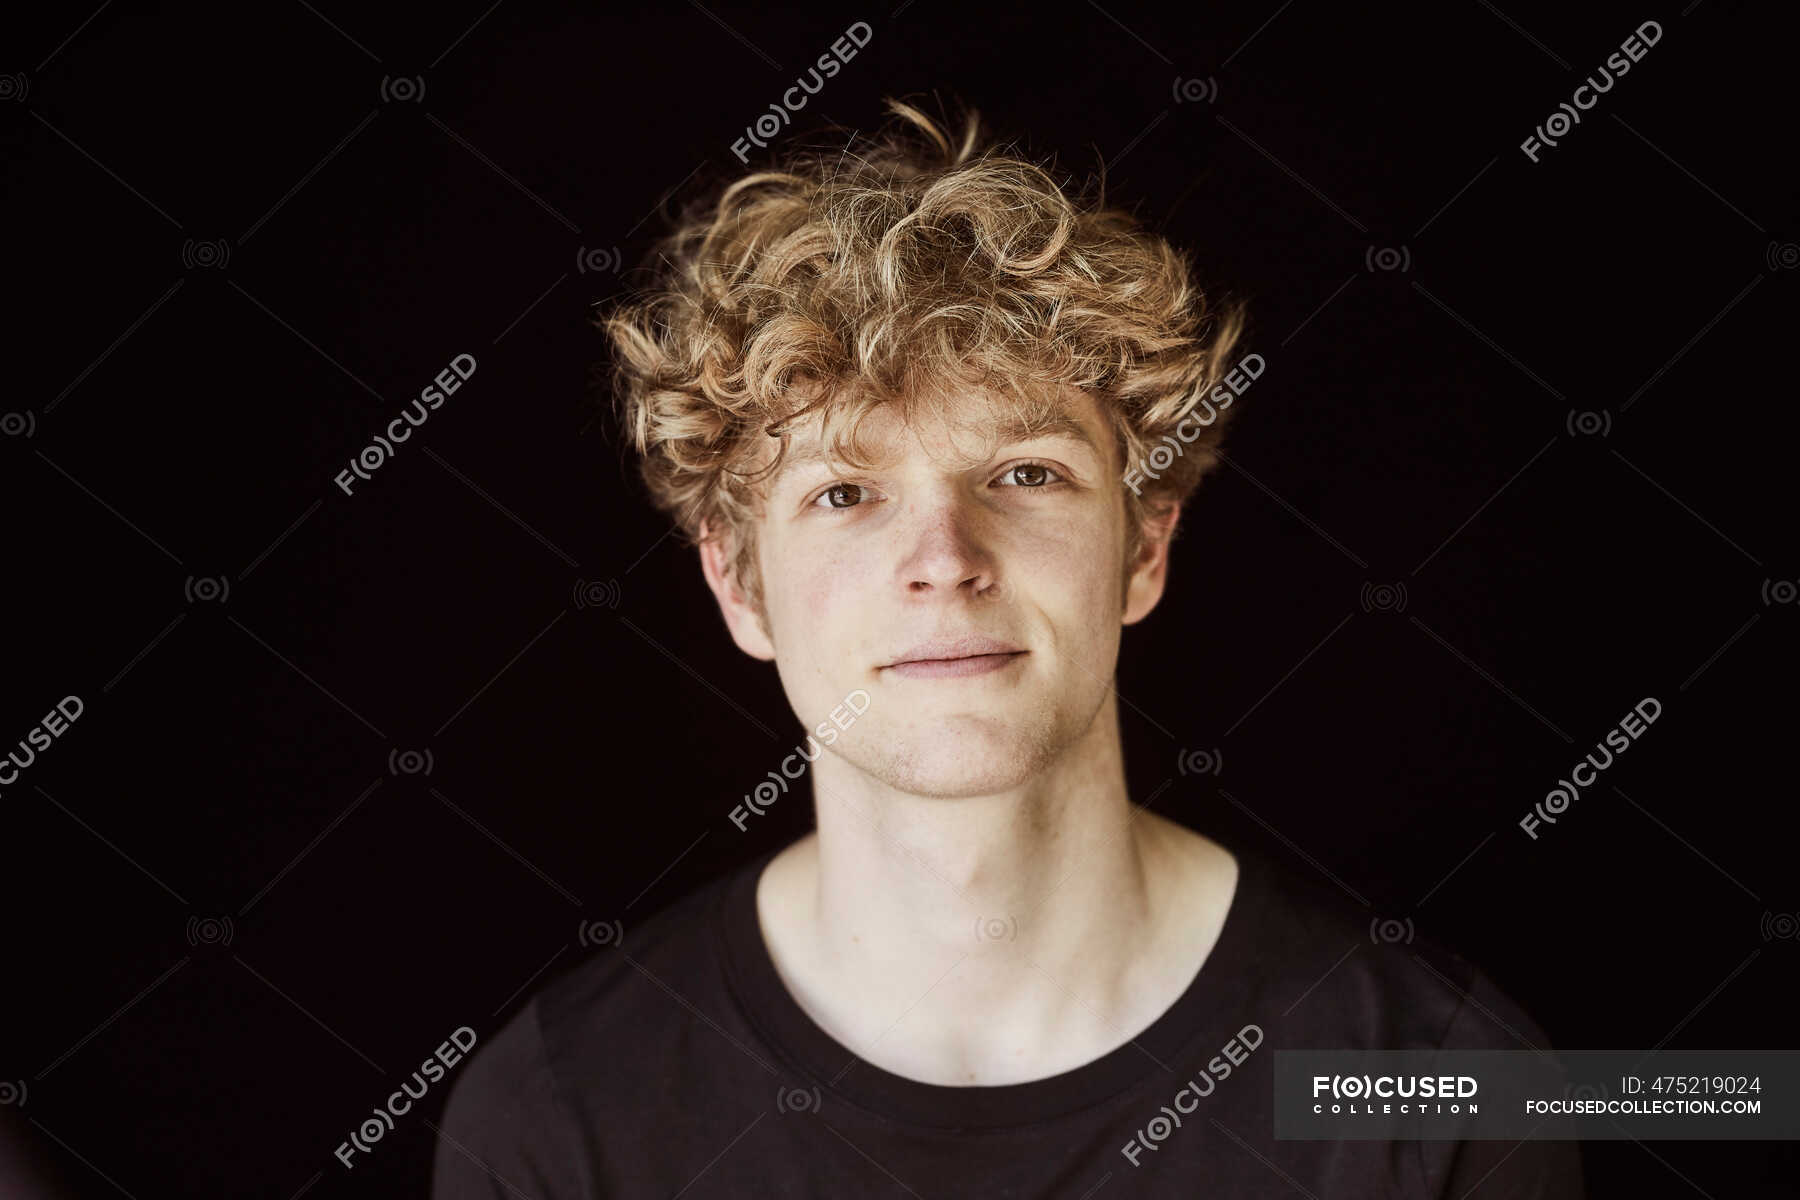 10. "How to Style and Care for Boys with Naturally Curly Blond Hair" - wide 9